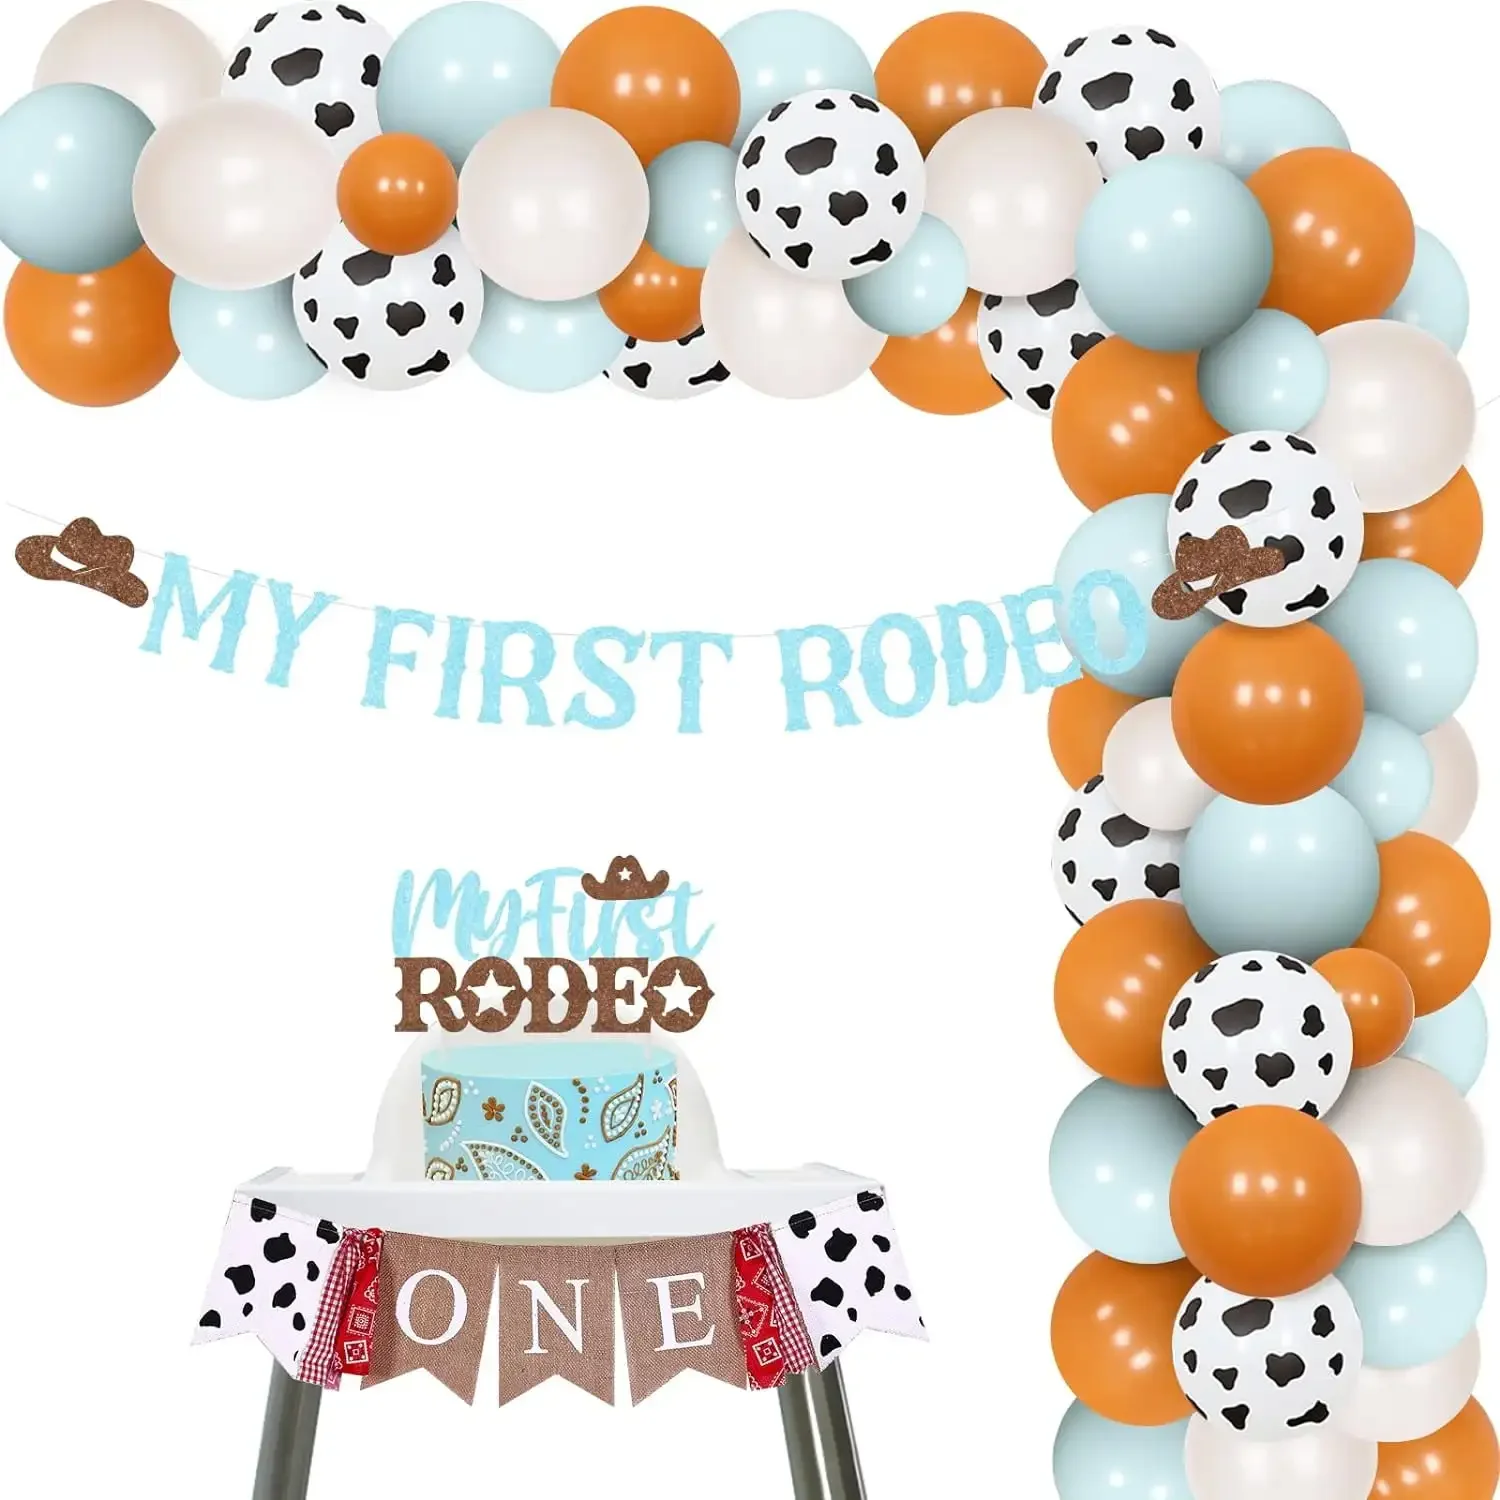 

FANGLELAND Boys 1st Birthday Decorations - Western Balloon Garland Arch Kit, Cowboy Hat Banner Cake Toppers Bady Party Supplies